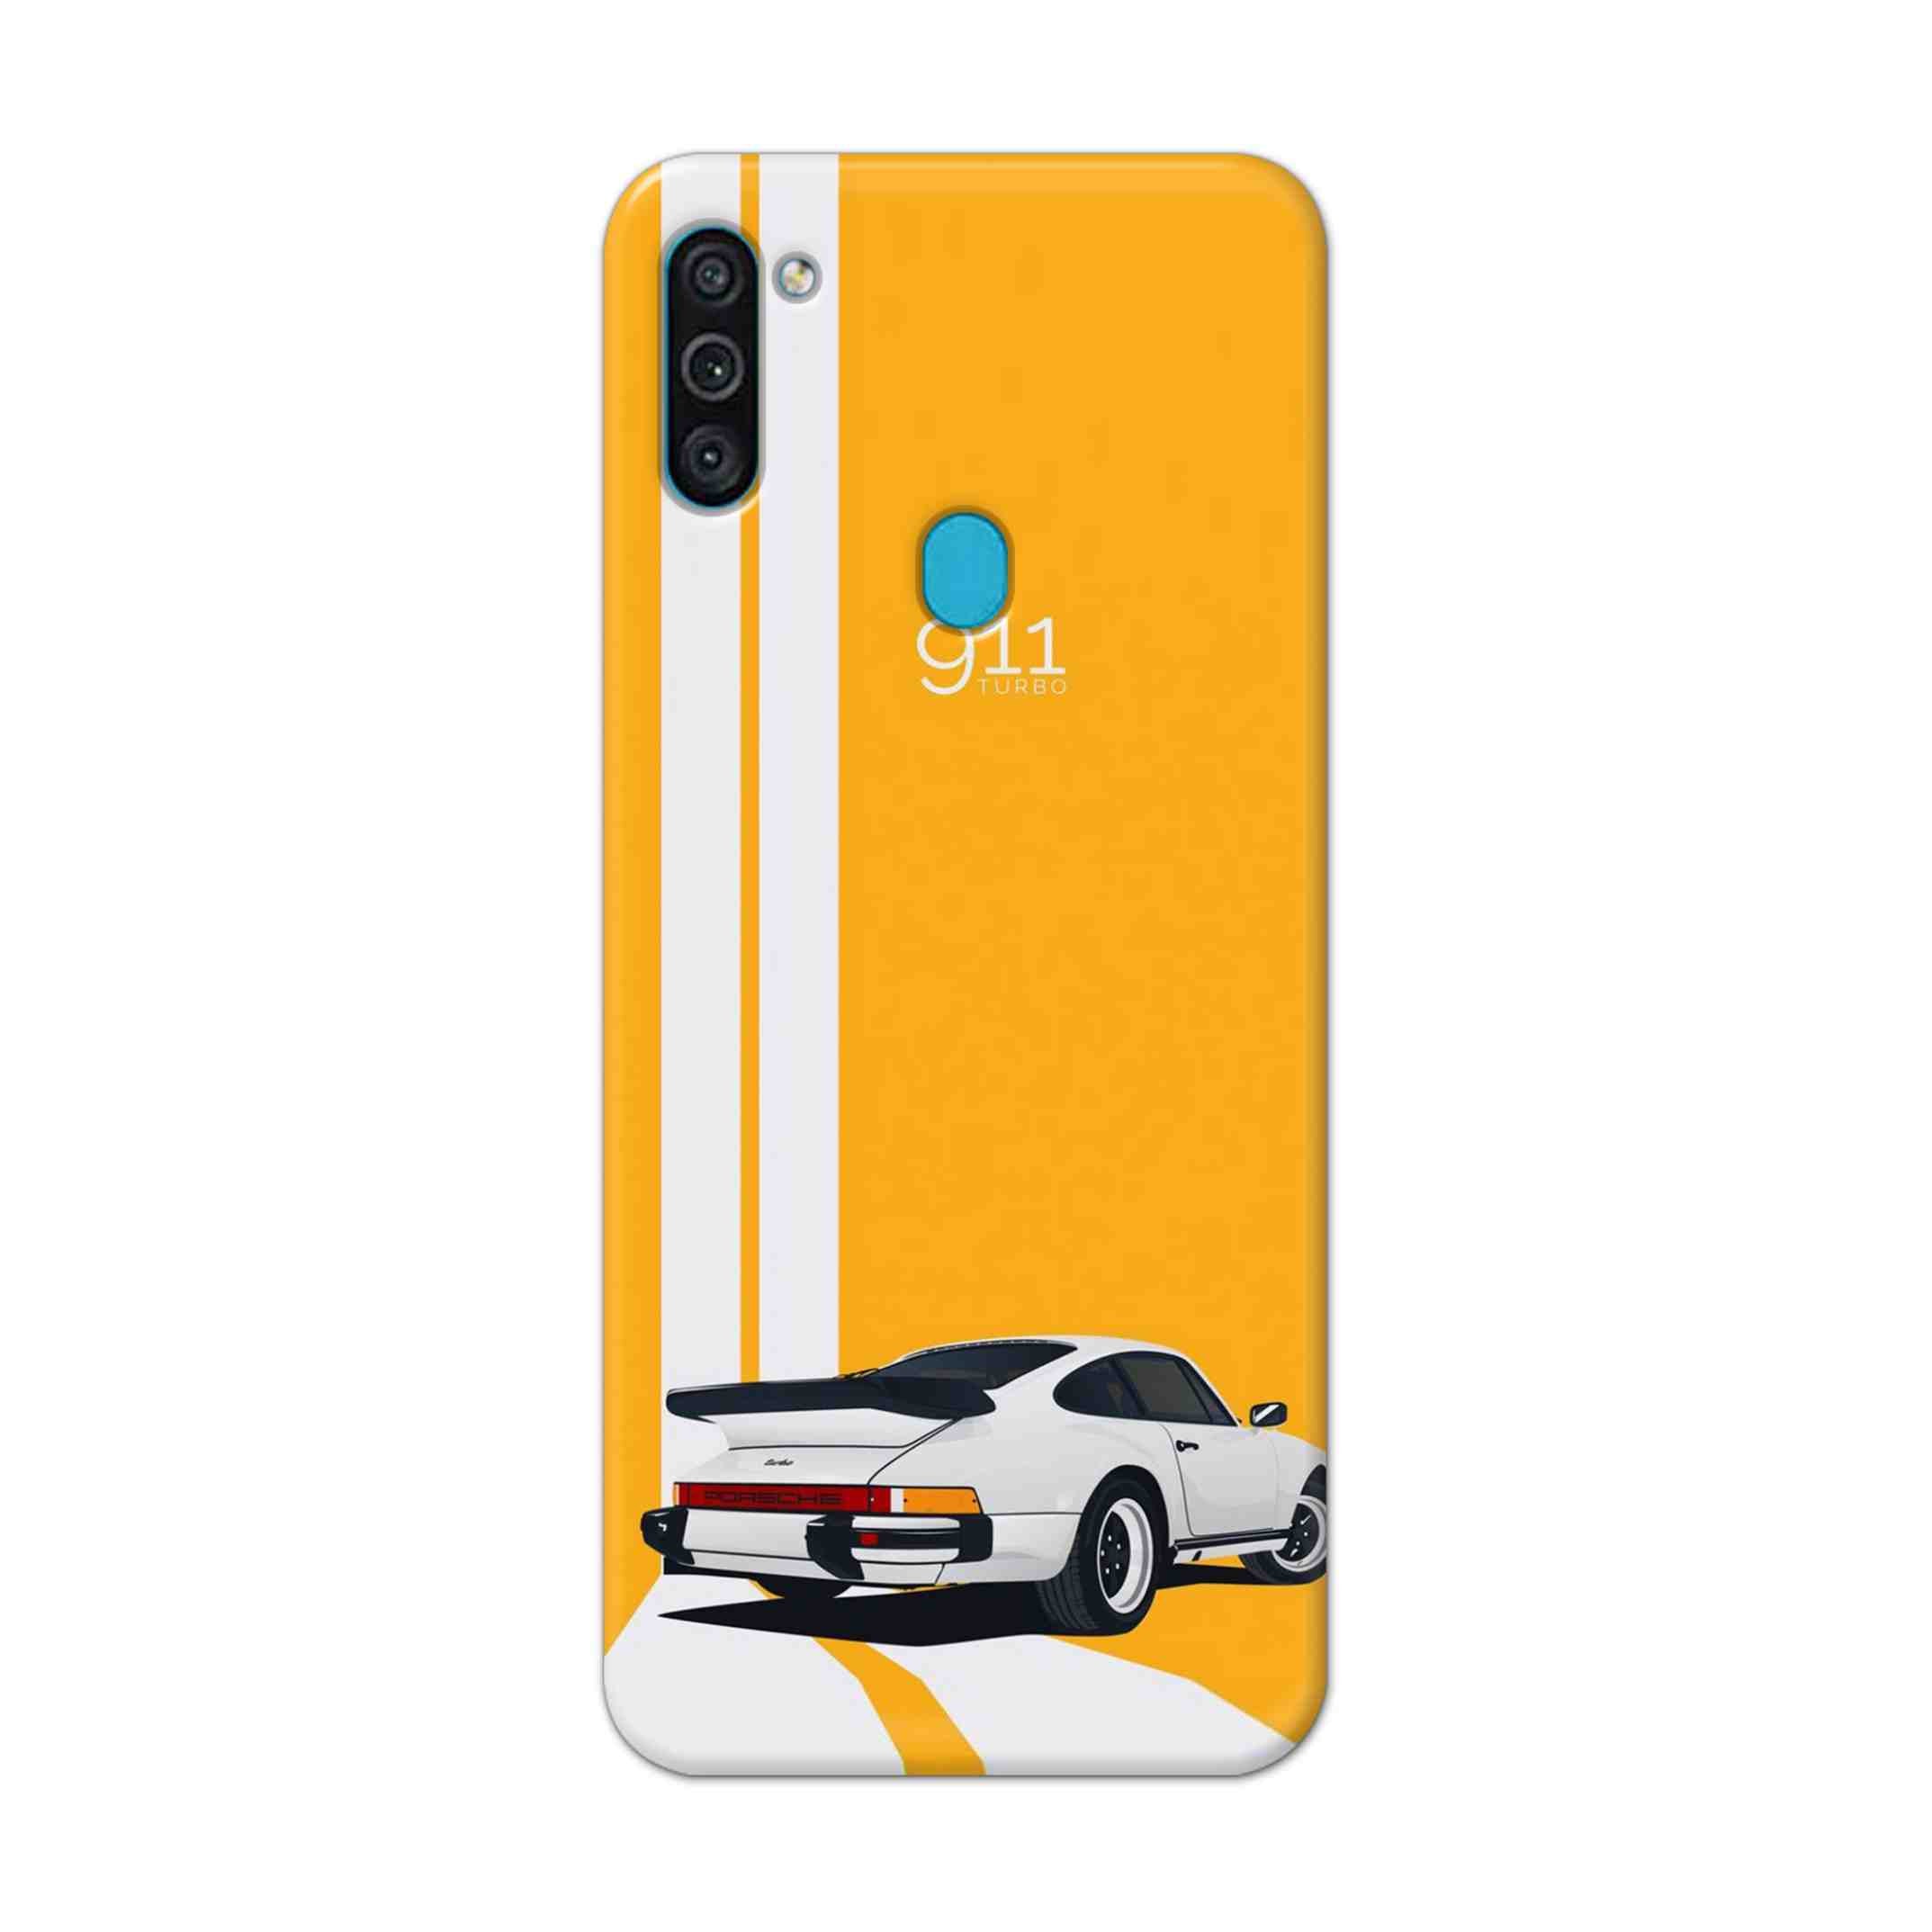 Buy 911 Gt Porche Hard Back Mobile Phone Case Cover For Samsung Galaxy M11 Online